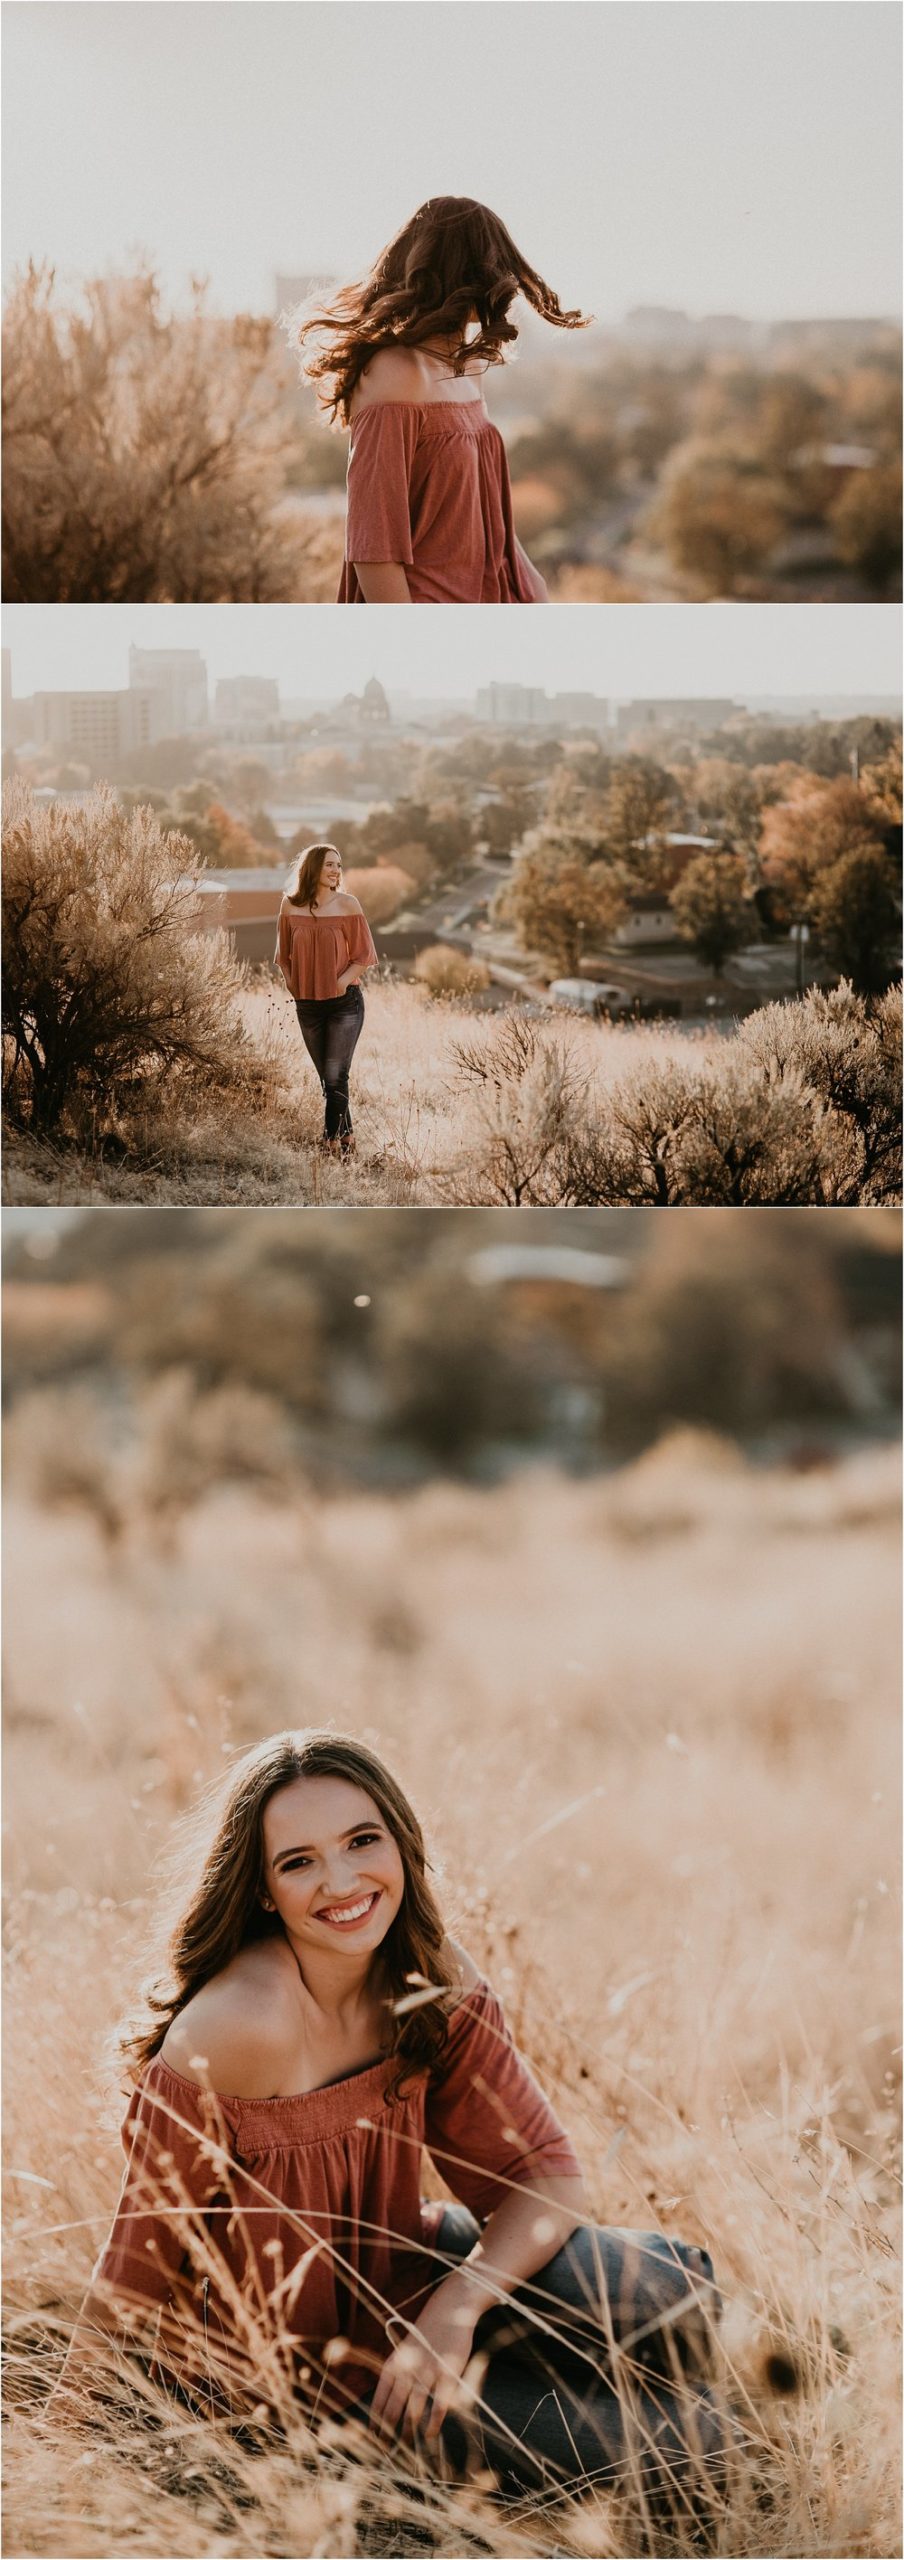 Boise Senior Photographer Makayla Madden Photography Downtown Boise Centennial High Senior Pictures Boise Foothills Senior Outfit Locations Raw Real Natural Candid Moments Fall Senior